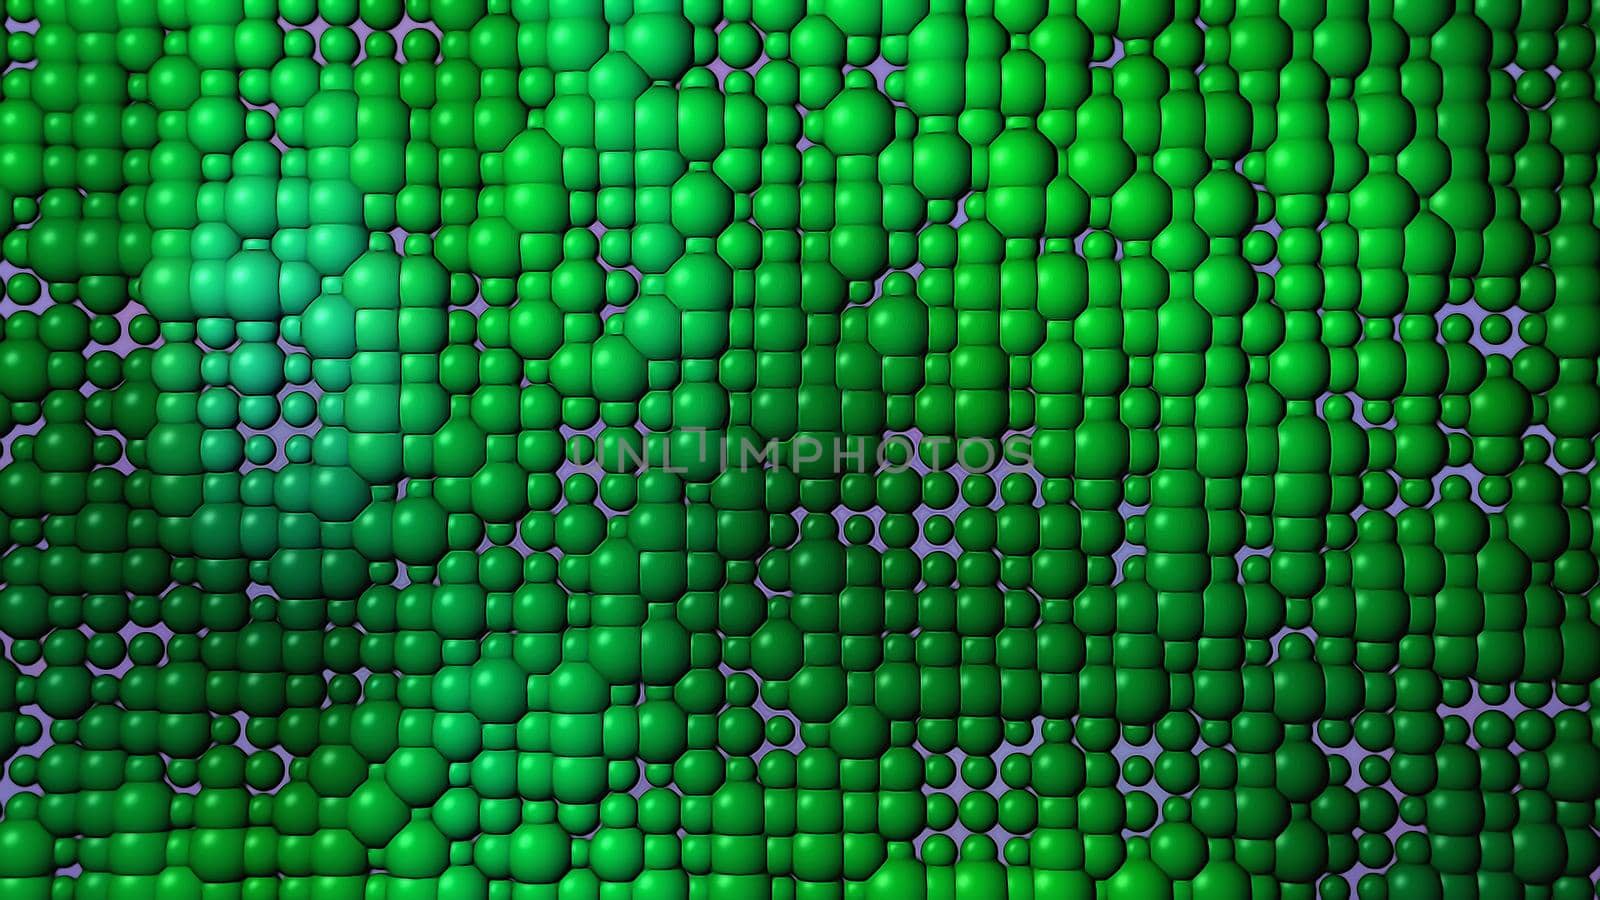 Abstract green background with a surface of spheres. 3d image